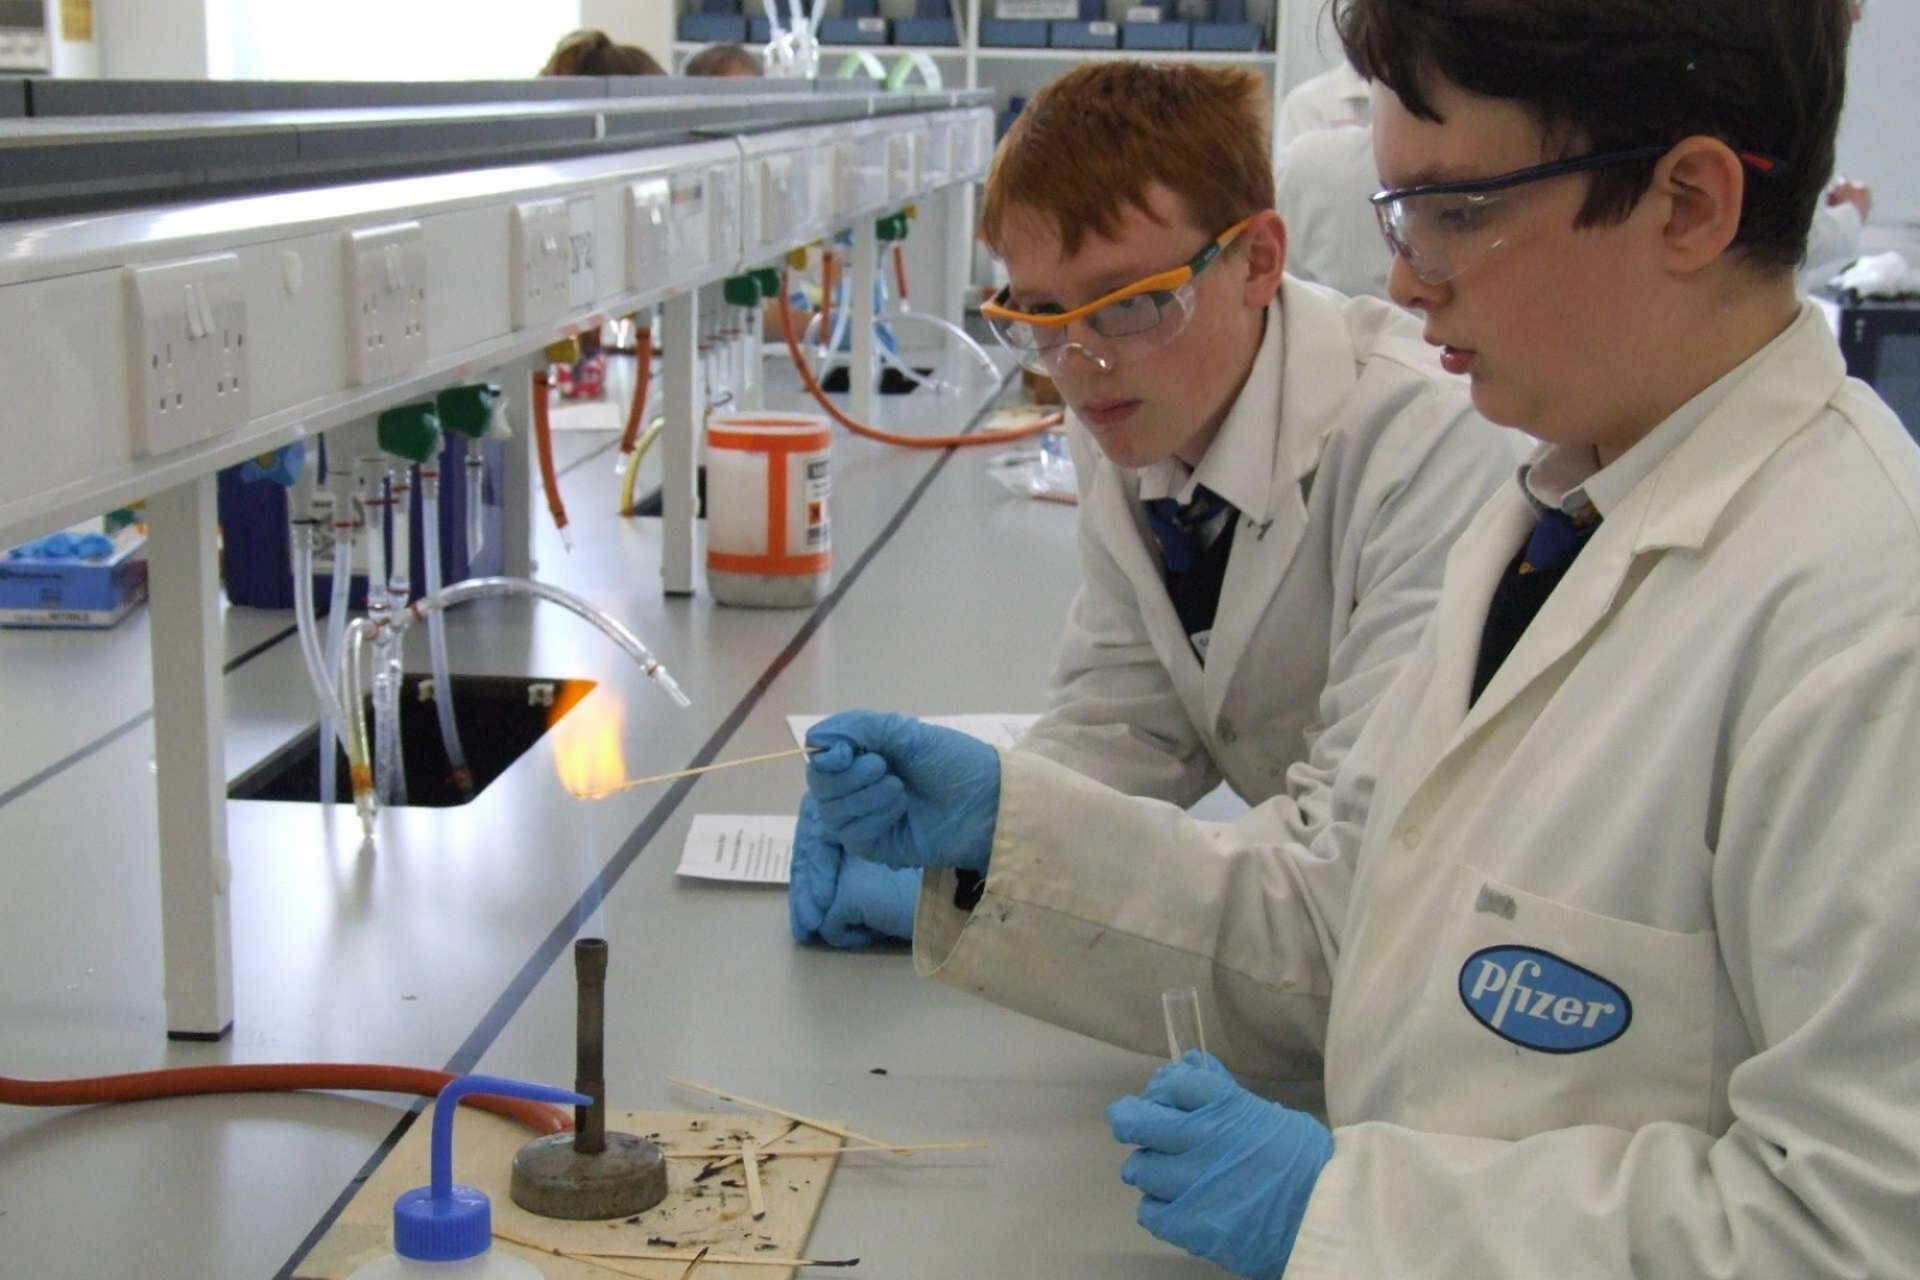 Two school students working with Bunsen burner in laboratory